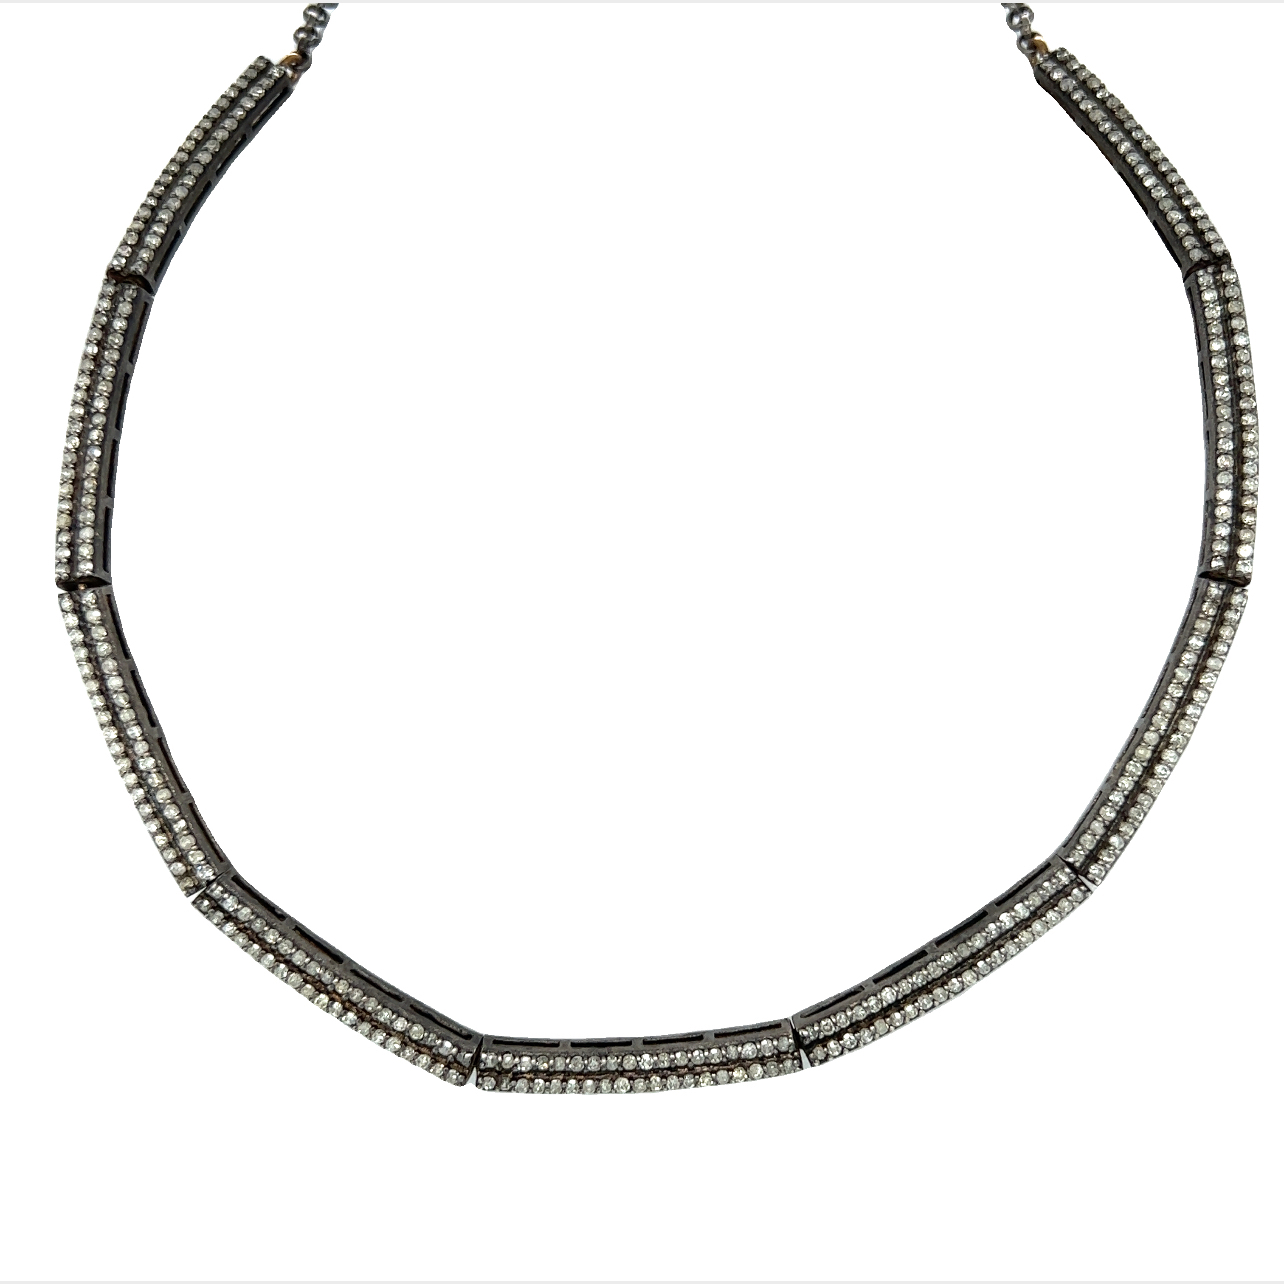 Featured image for “Double Diamond Bar Collar”